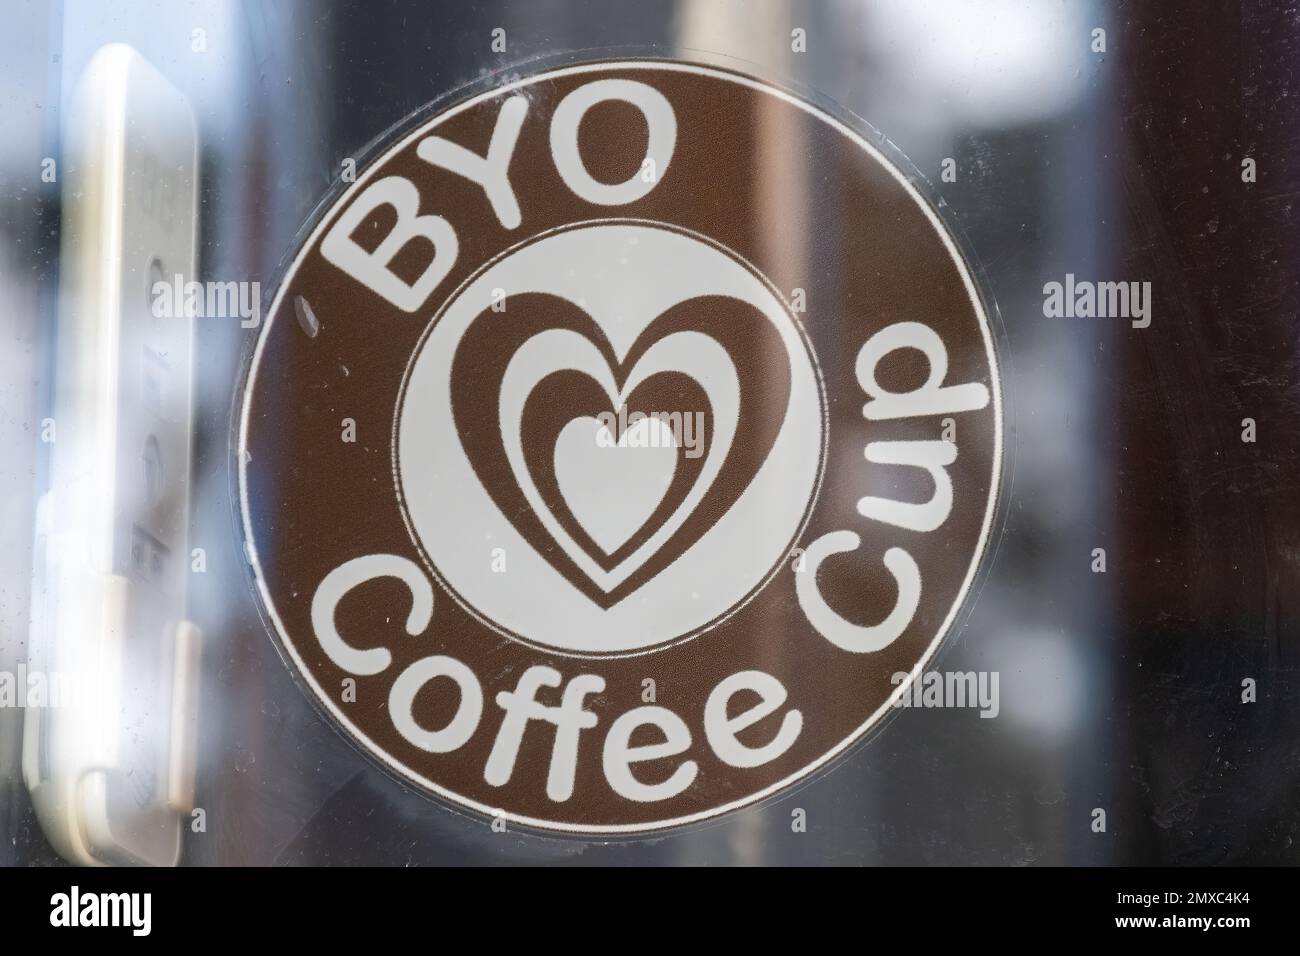 BYO coffee cup, Bring your own coffee cup sticker in cafe window, aiming to reduce usage of single use plastics, UK Stock Photo